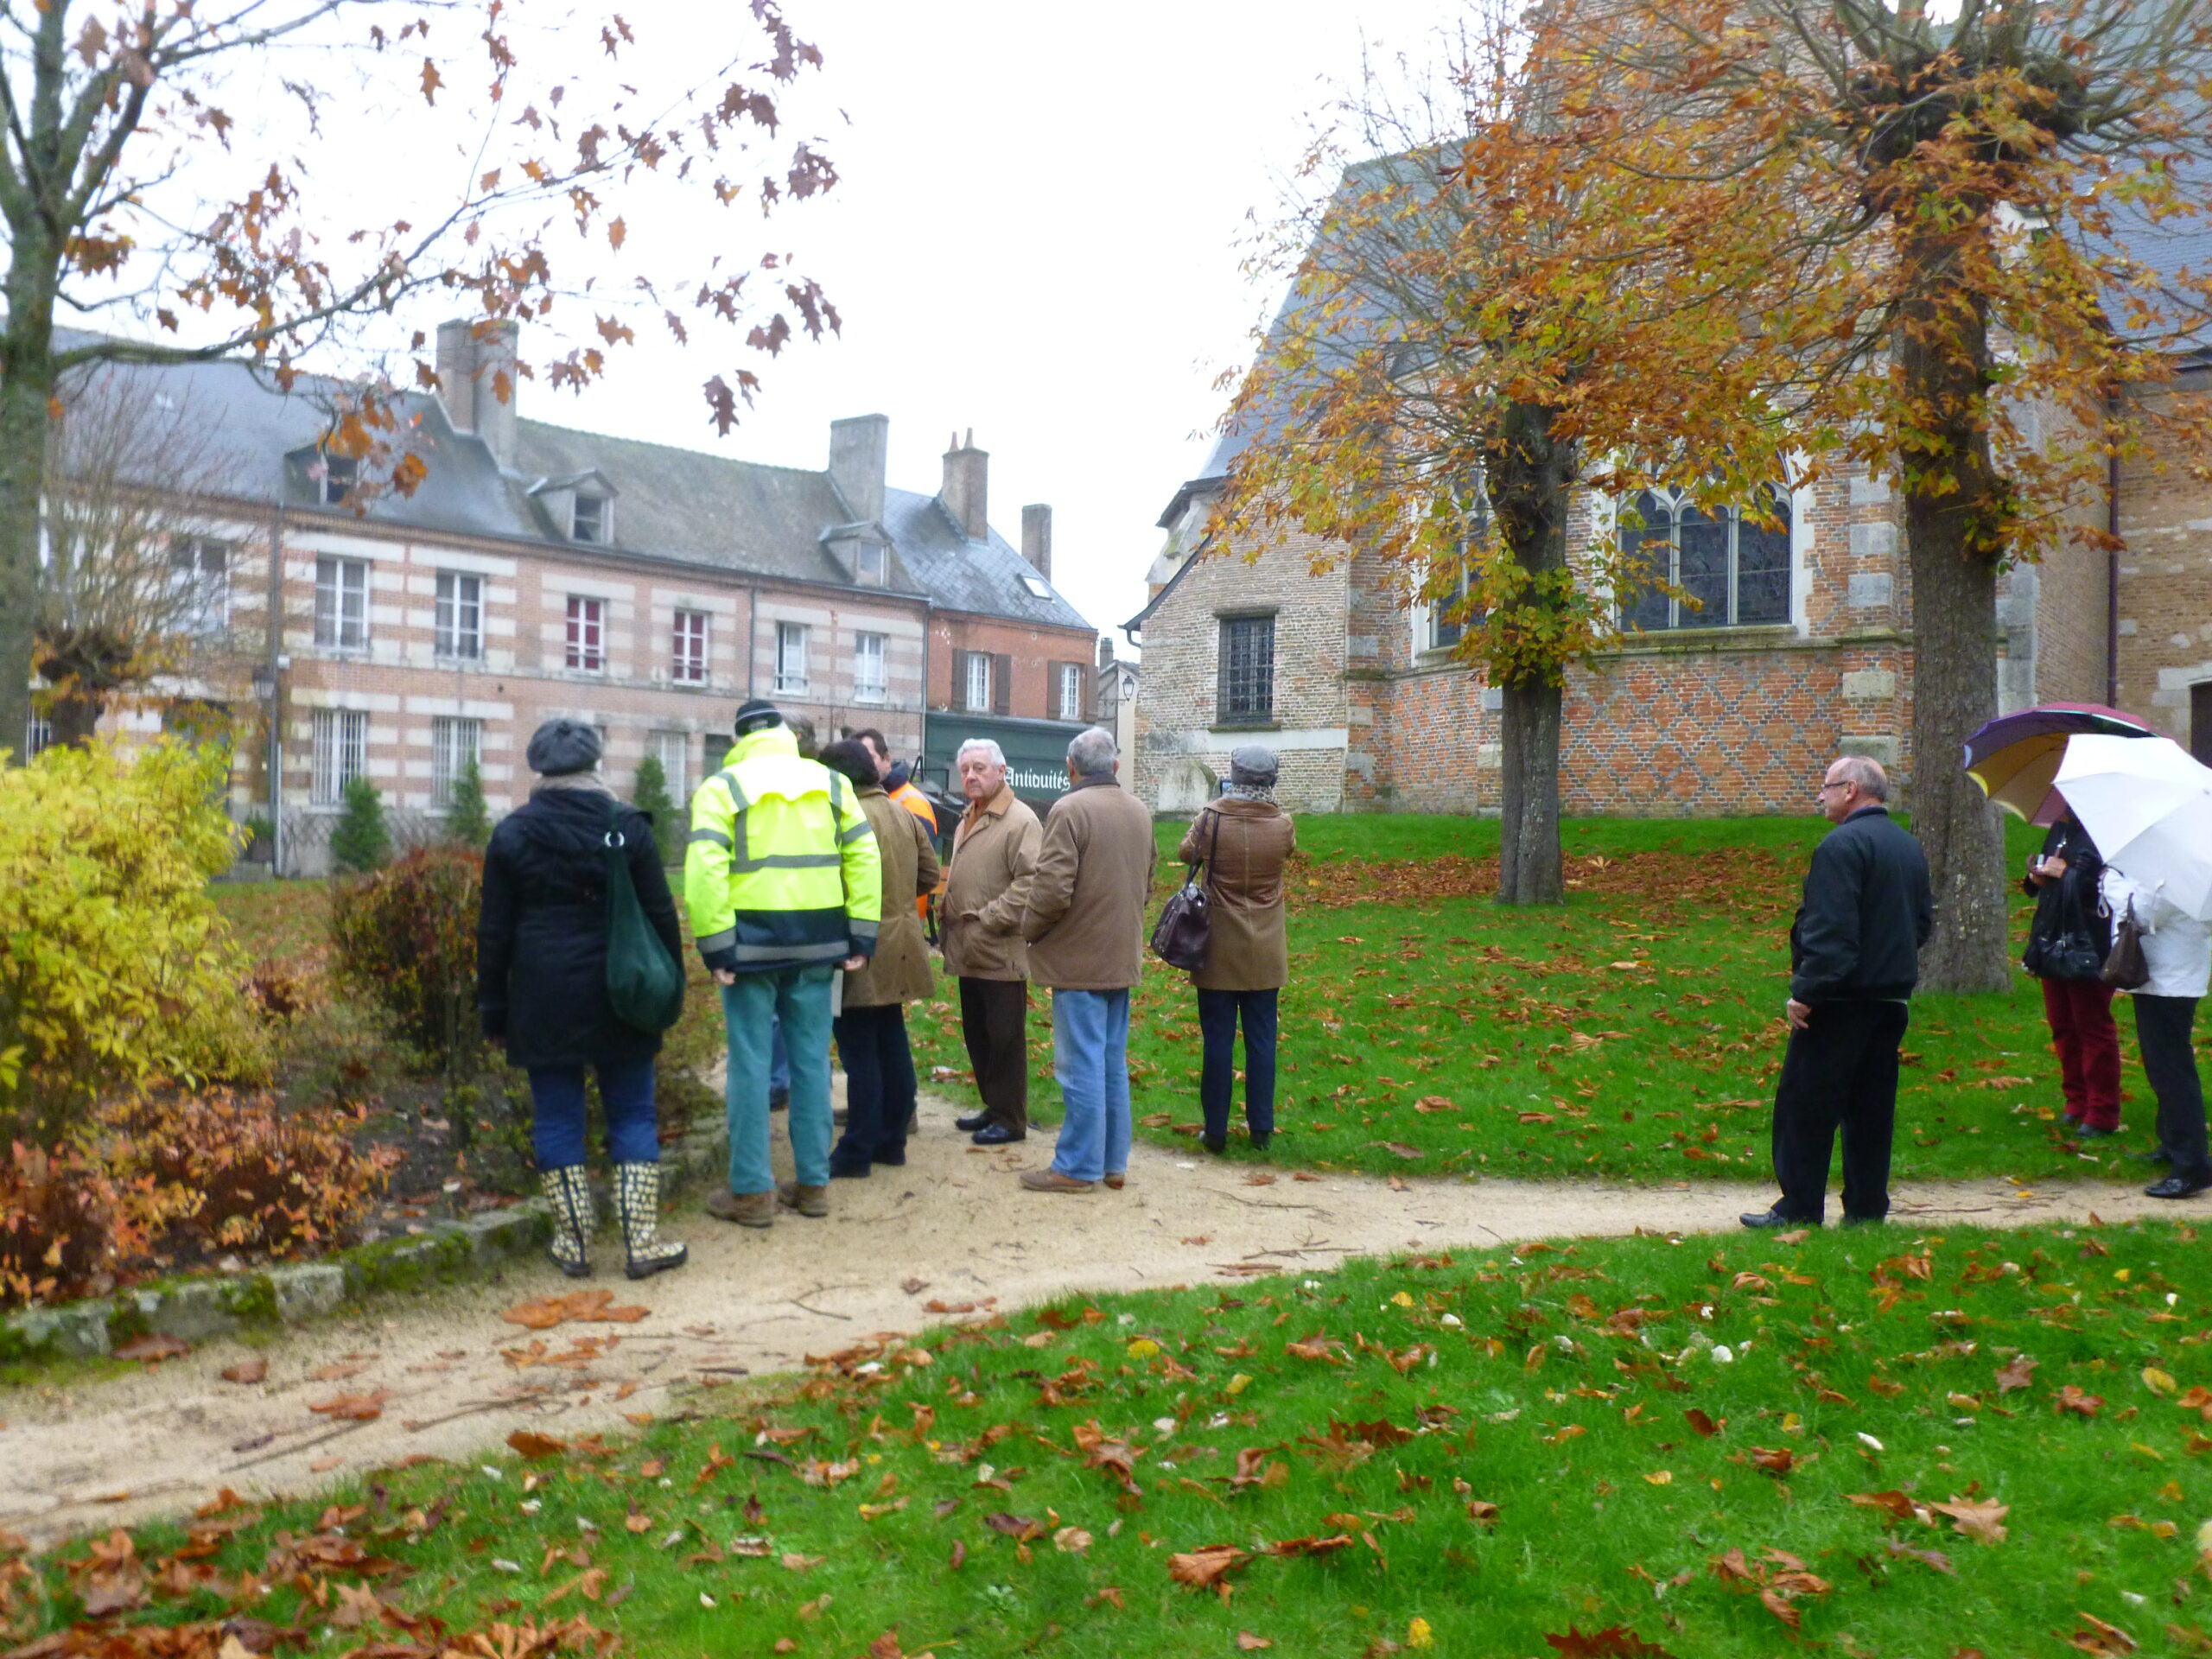 You are currently viewing “Jardinons nos villages” à Chaumont-sur-Tharonne